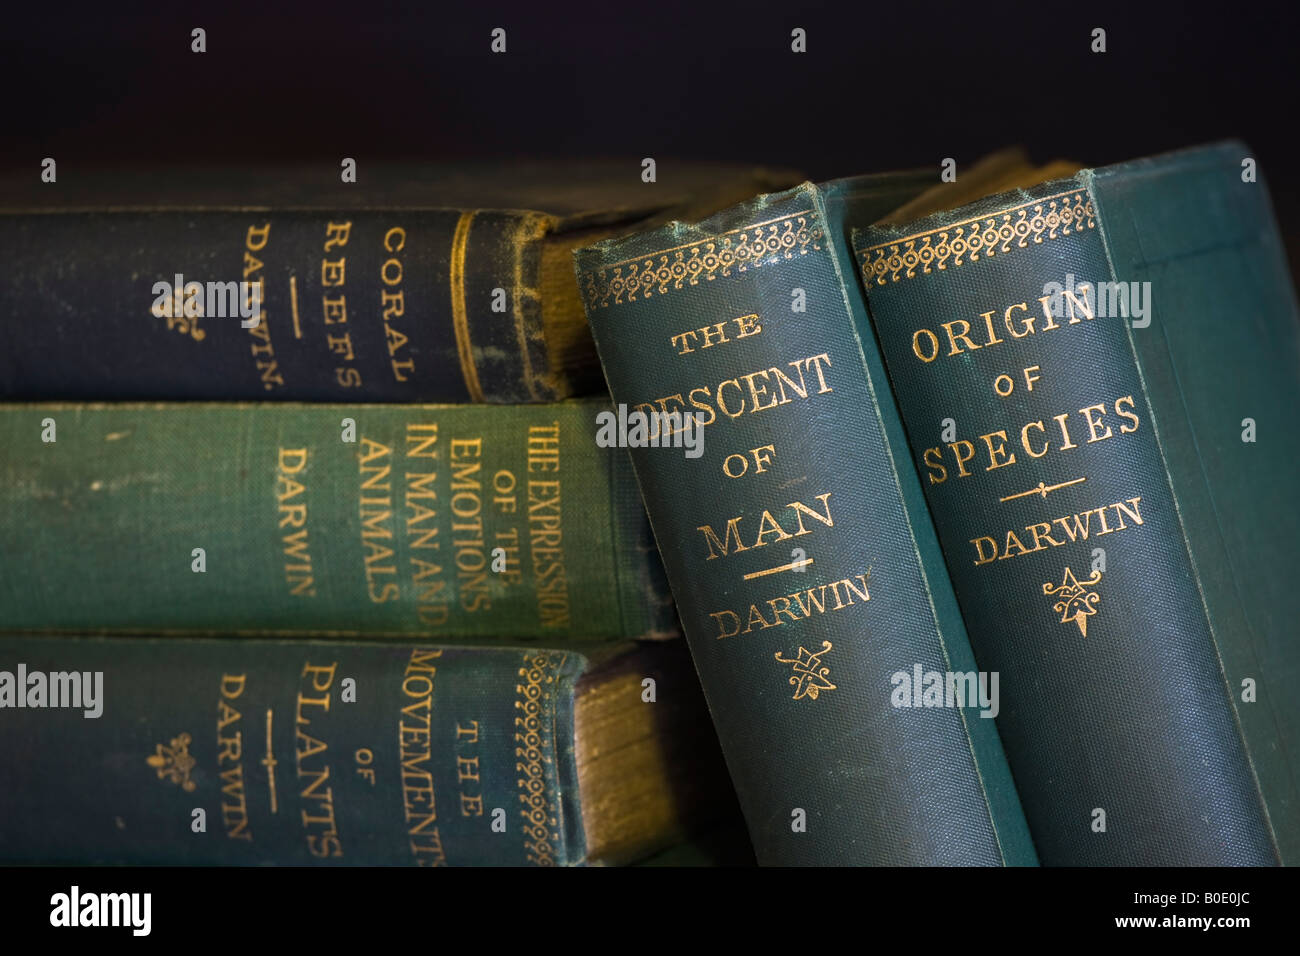 Books by Charles Darwin including On the Origin of Species and The Descent of Man Stock Photo